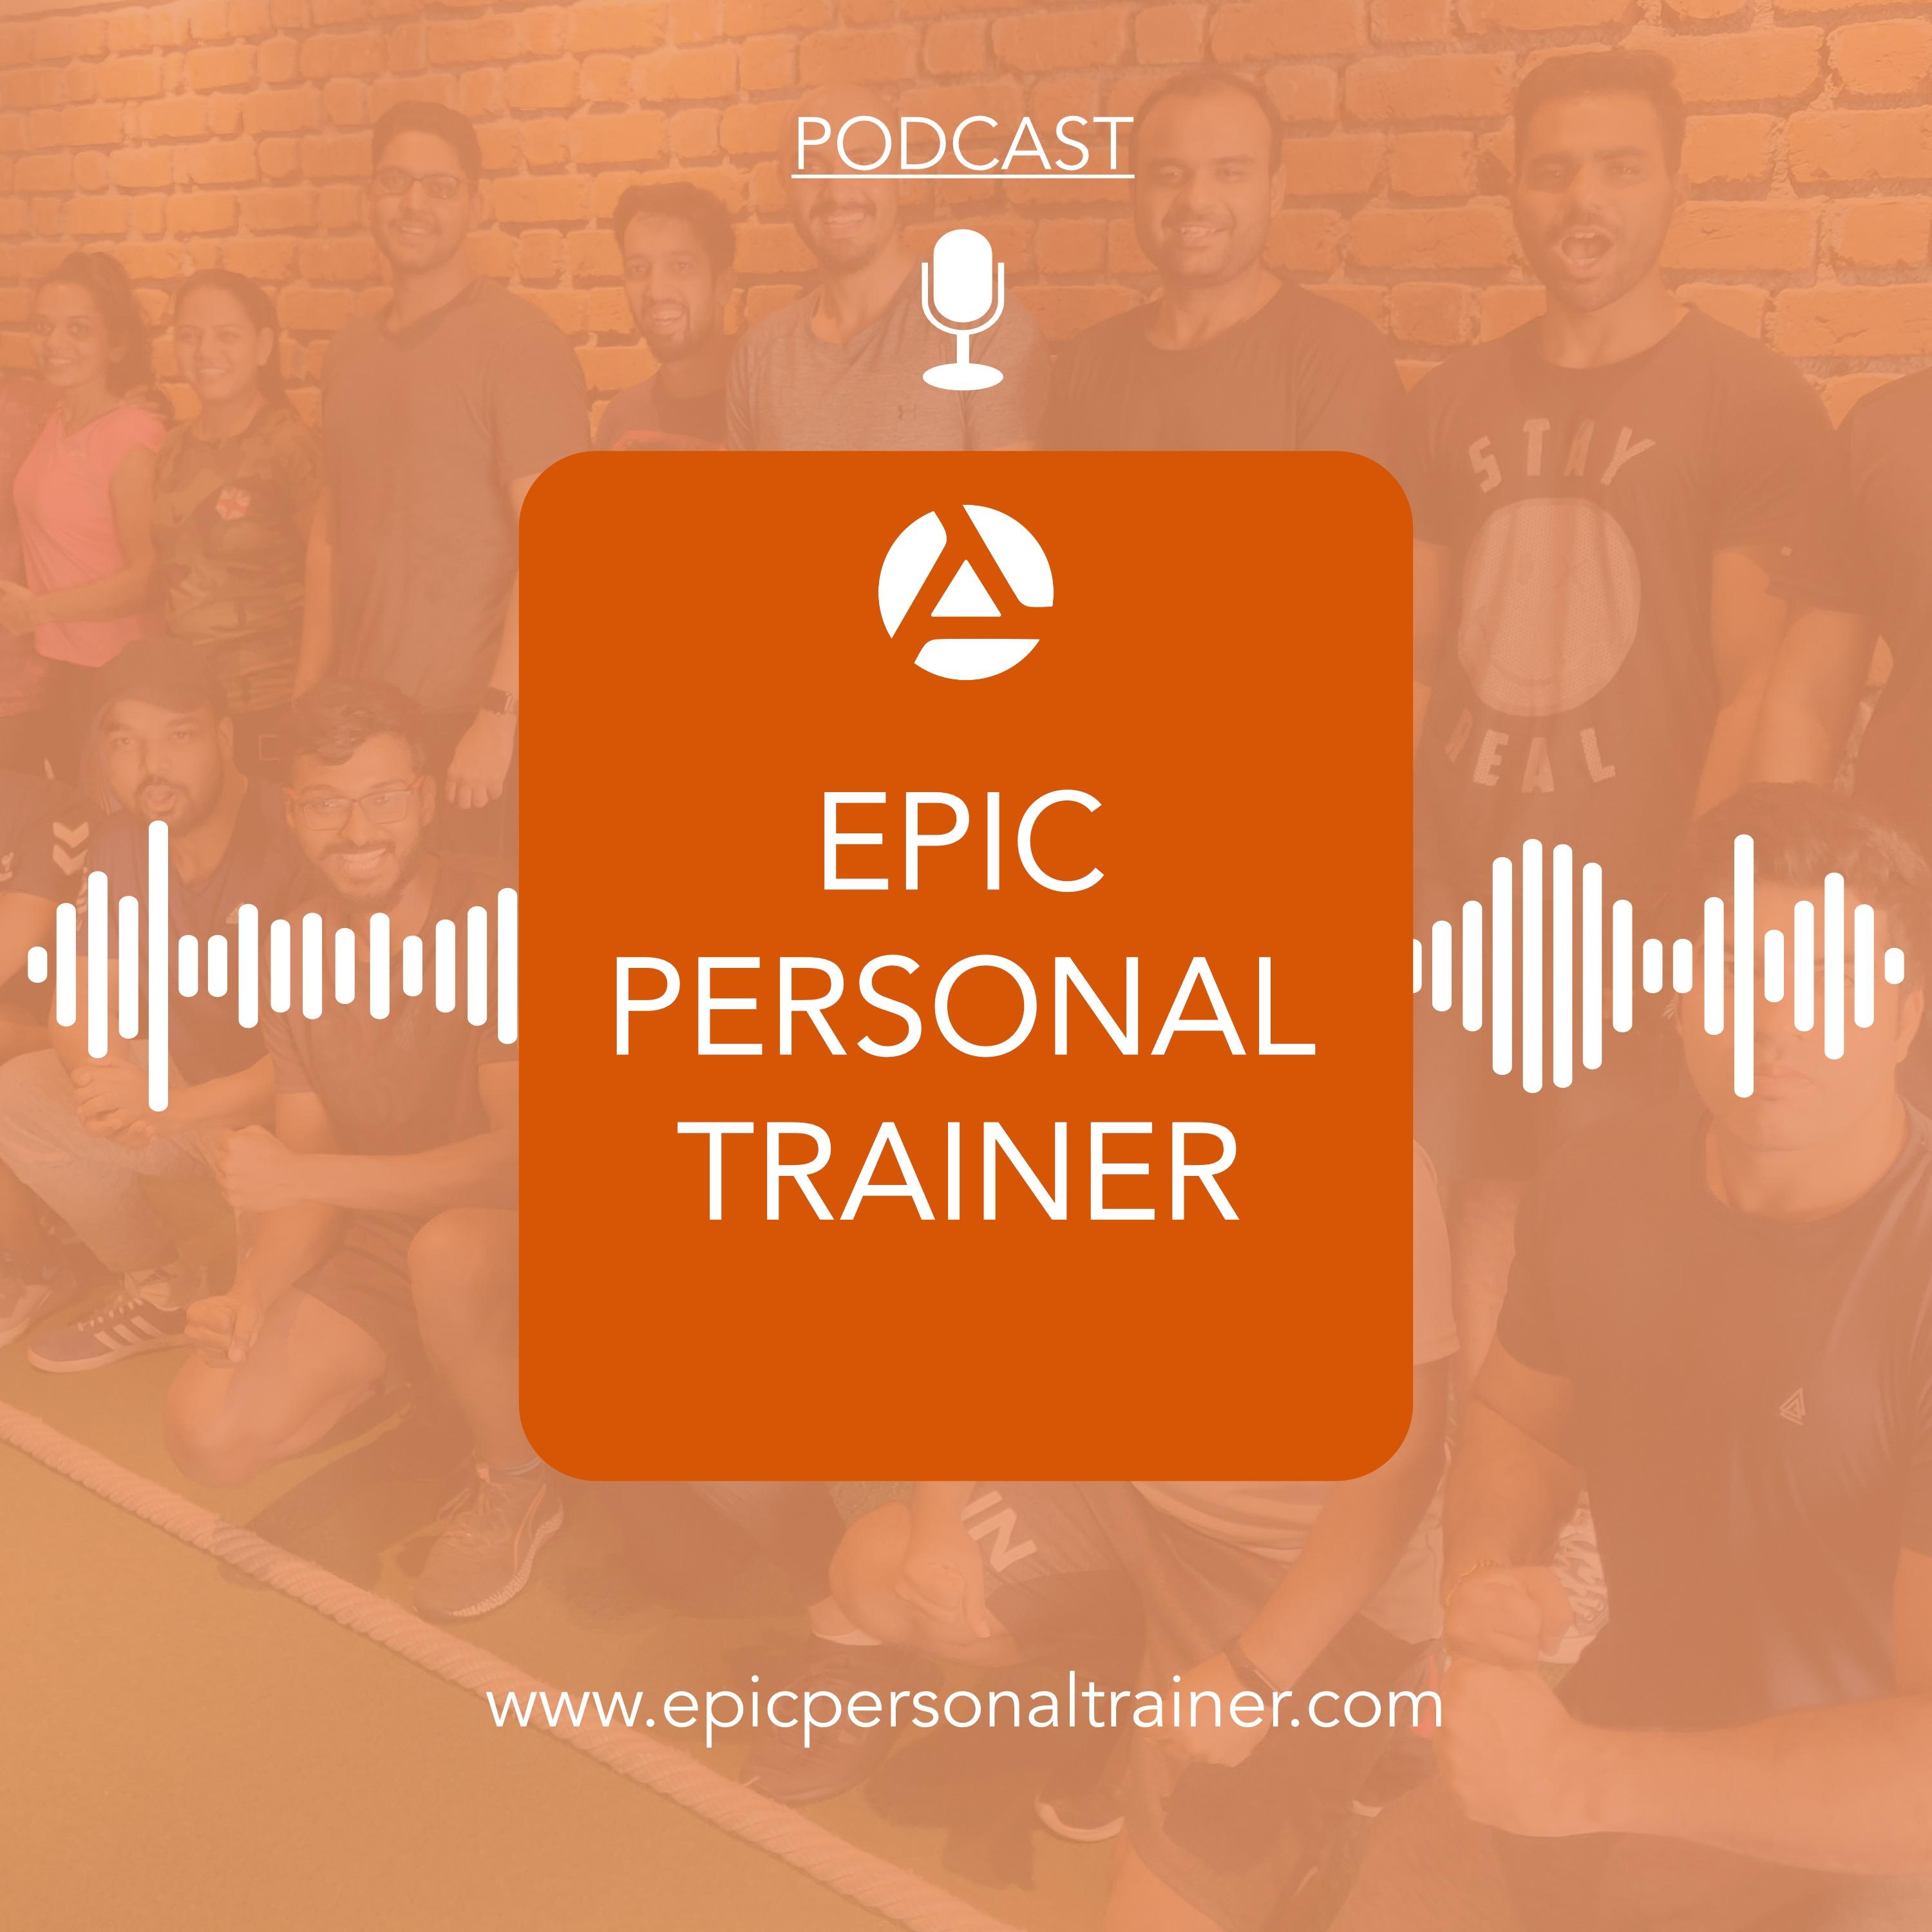 Epic Personal Trainer Podcast